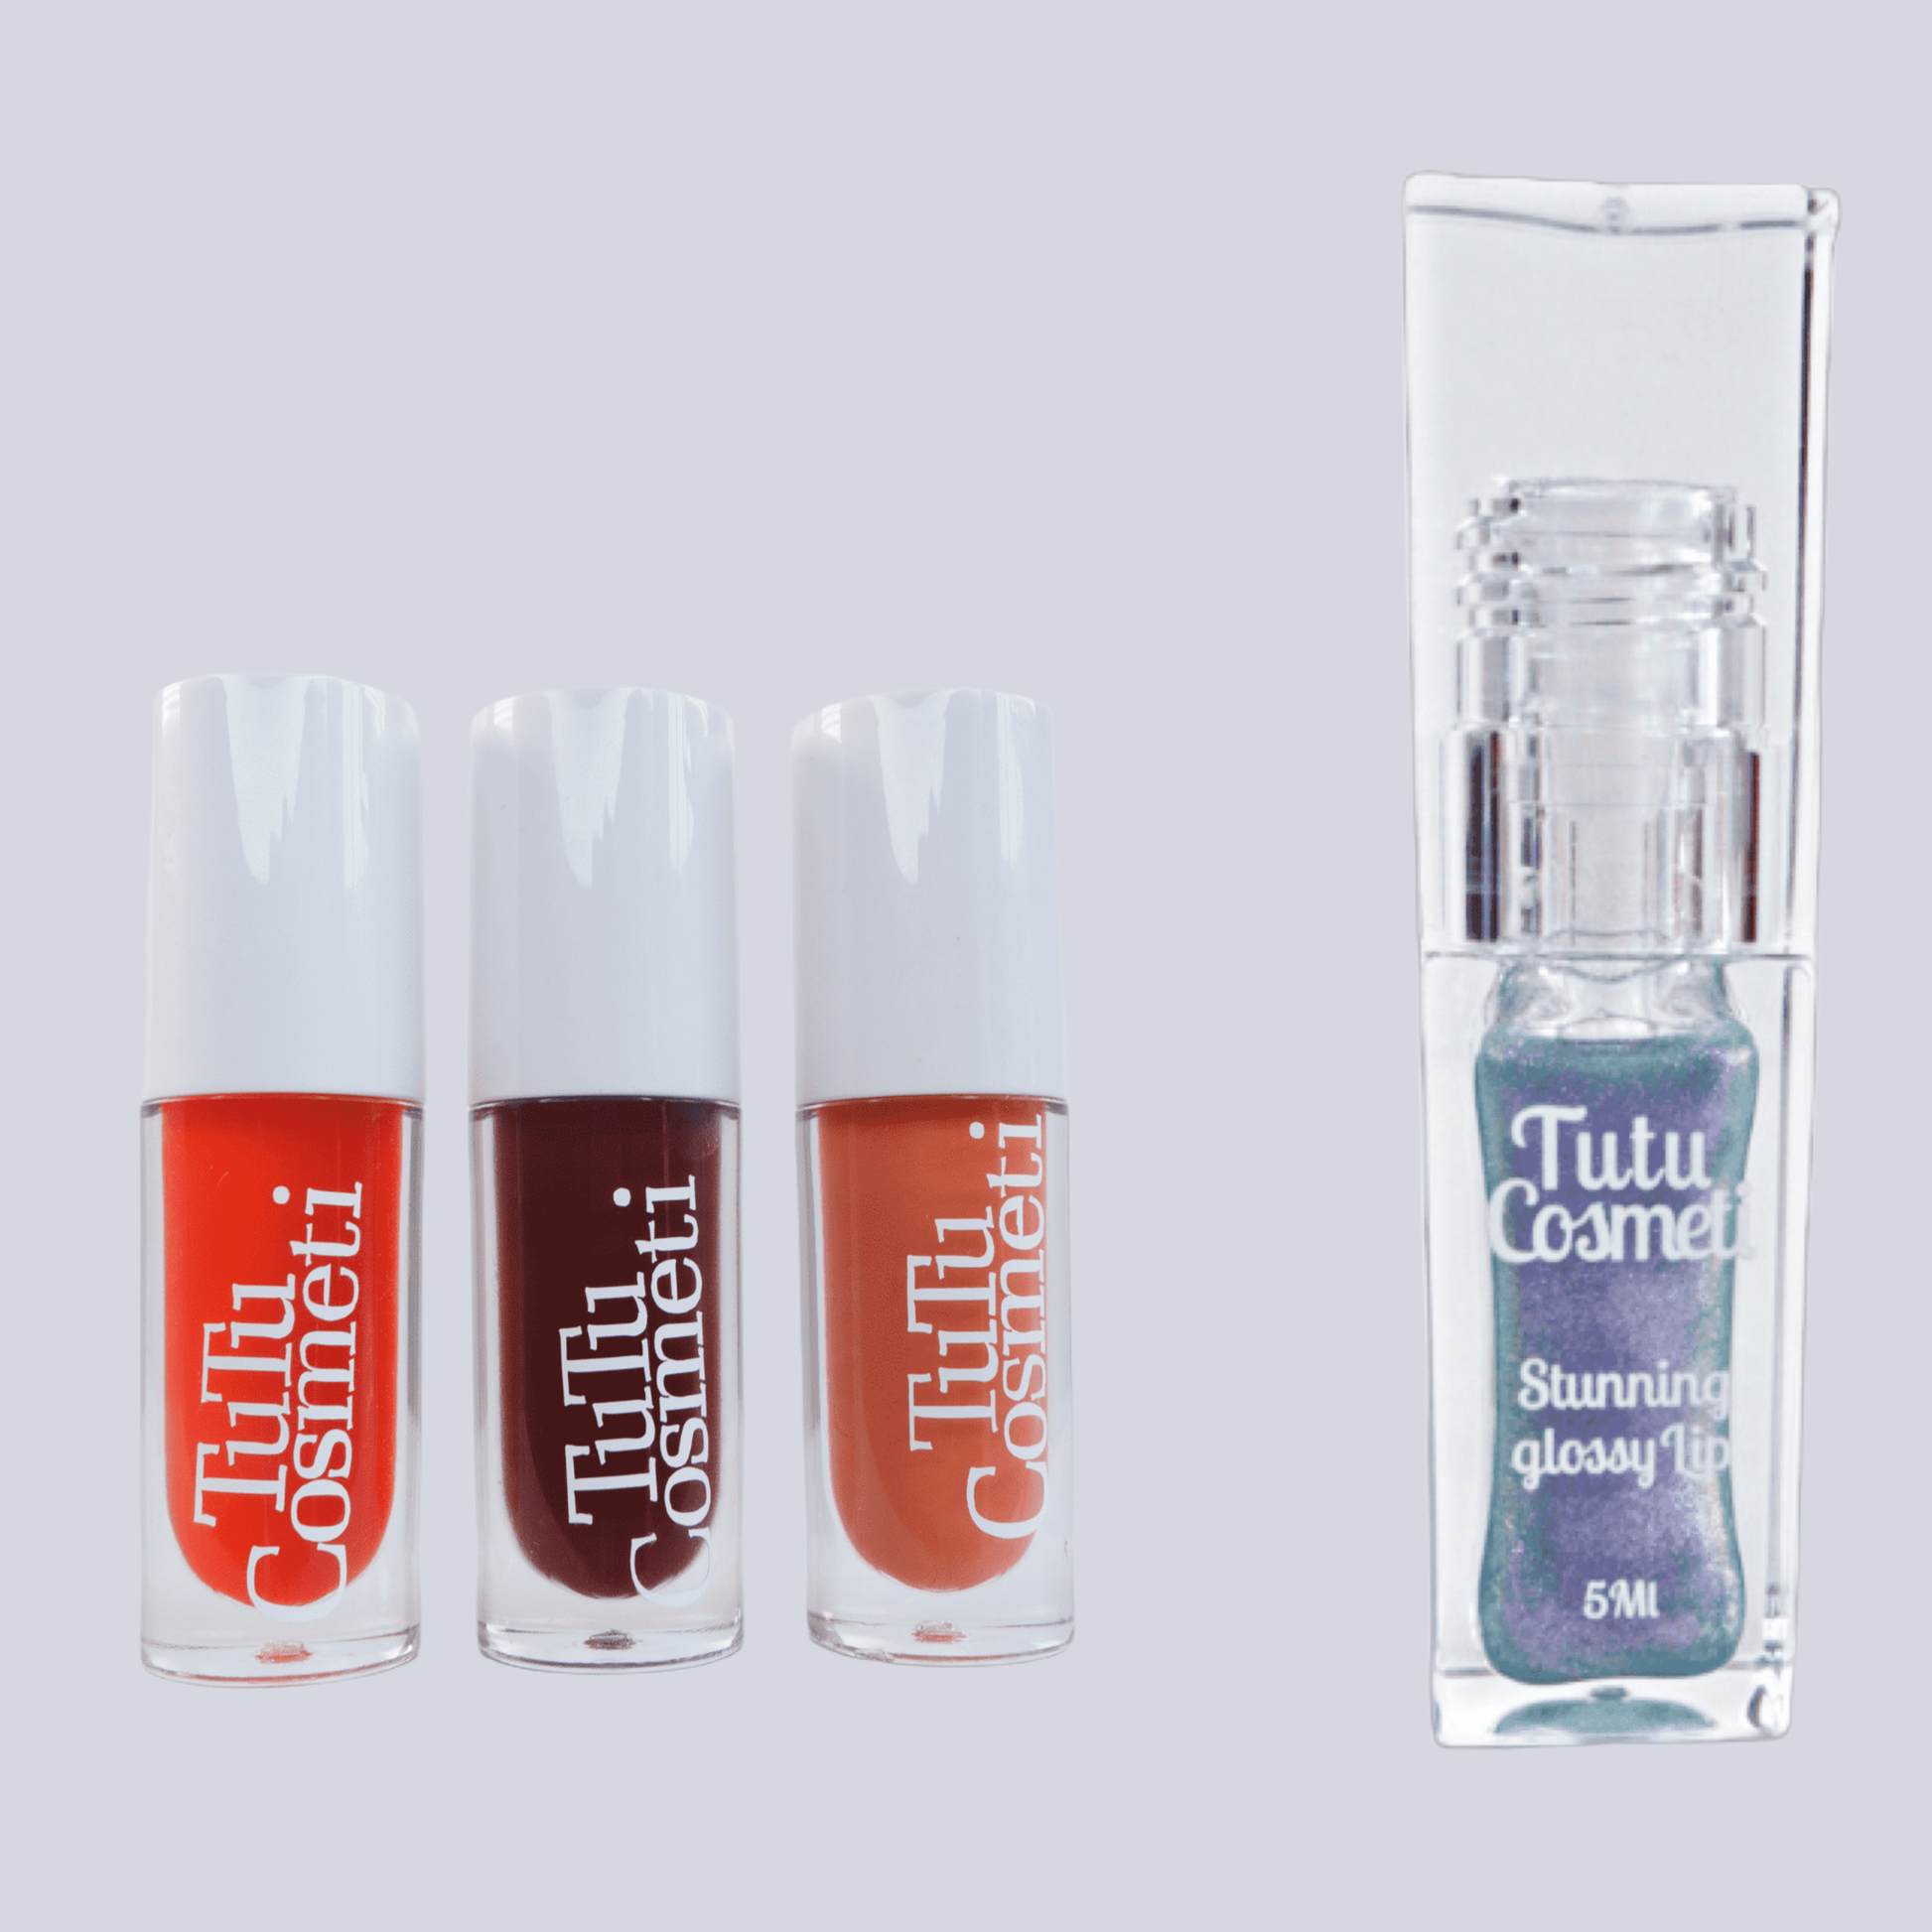 Lipgloss gift bundle idea.color pop lip trio-gloss set with free color-changing lip oil and a pair of earning 